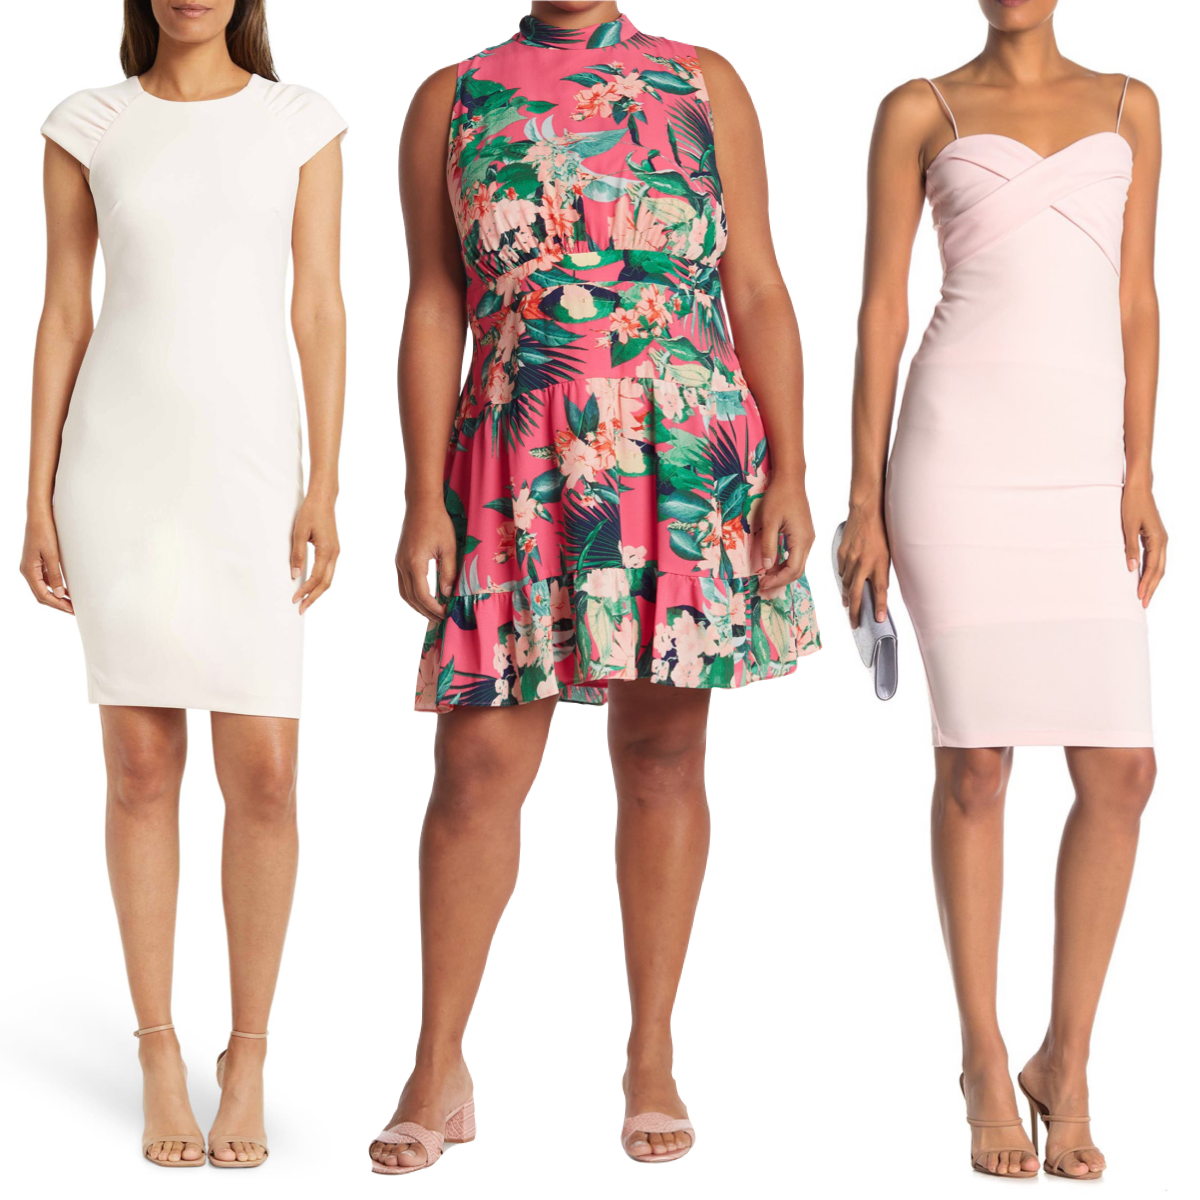 Can’t-Miss Under $50 Deals on Graduation Dresses From Nordstrom Rack